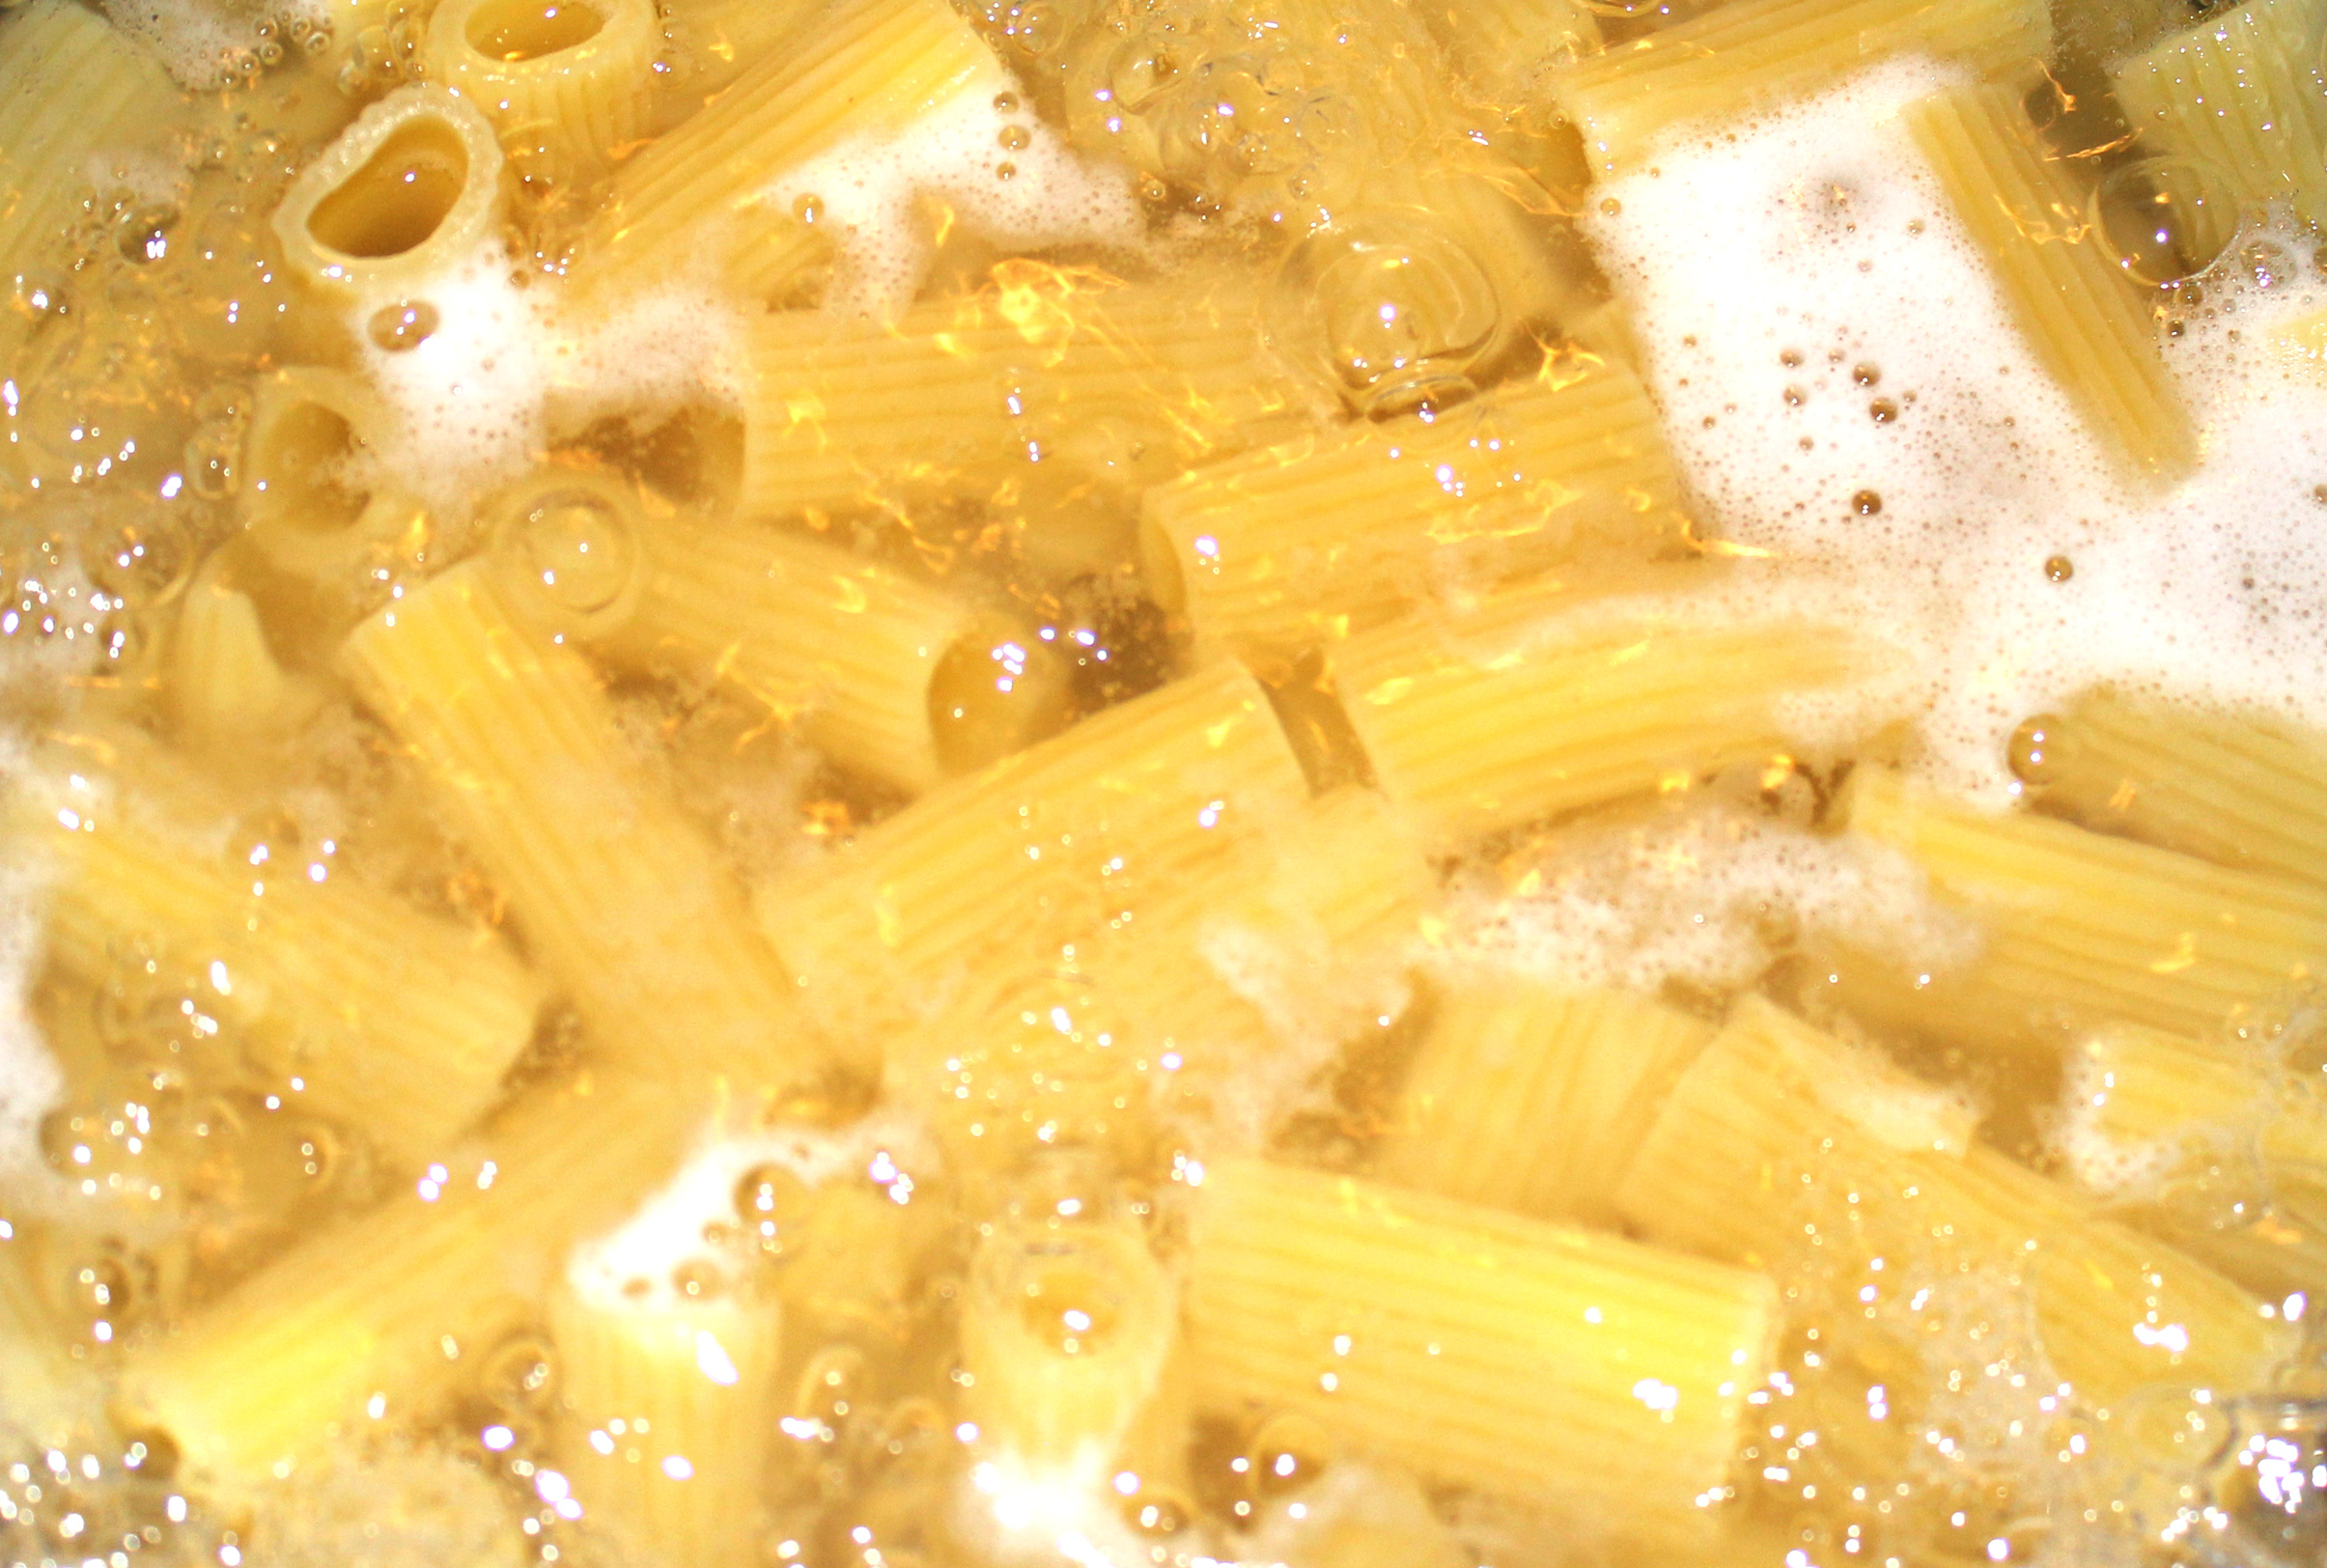 Macaroni being cooked on boiling water, Yellow, Process, Meal, Nutrition, HQ Photo